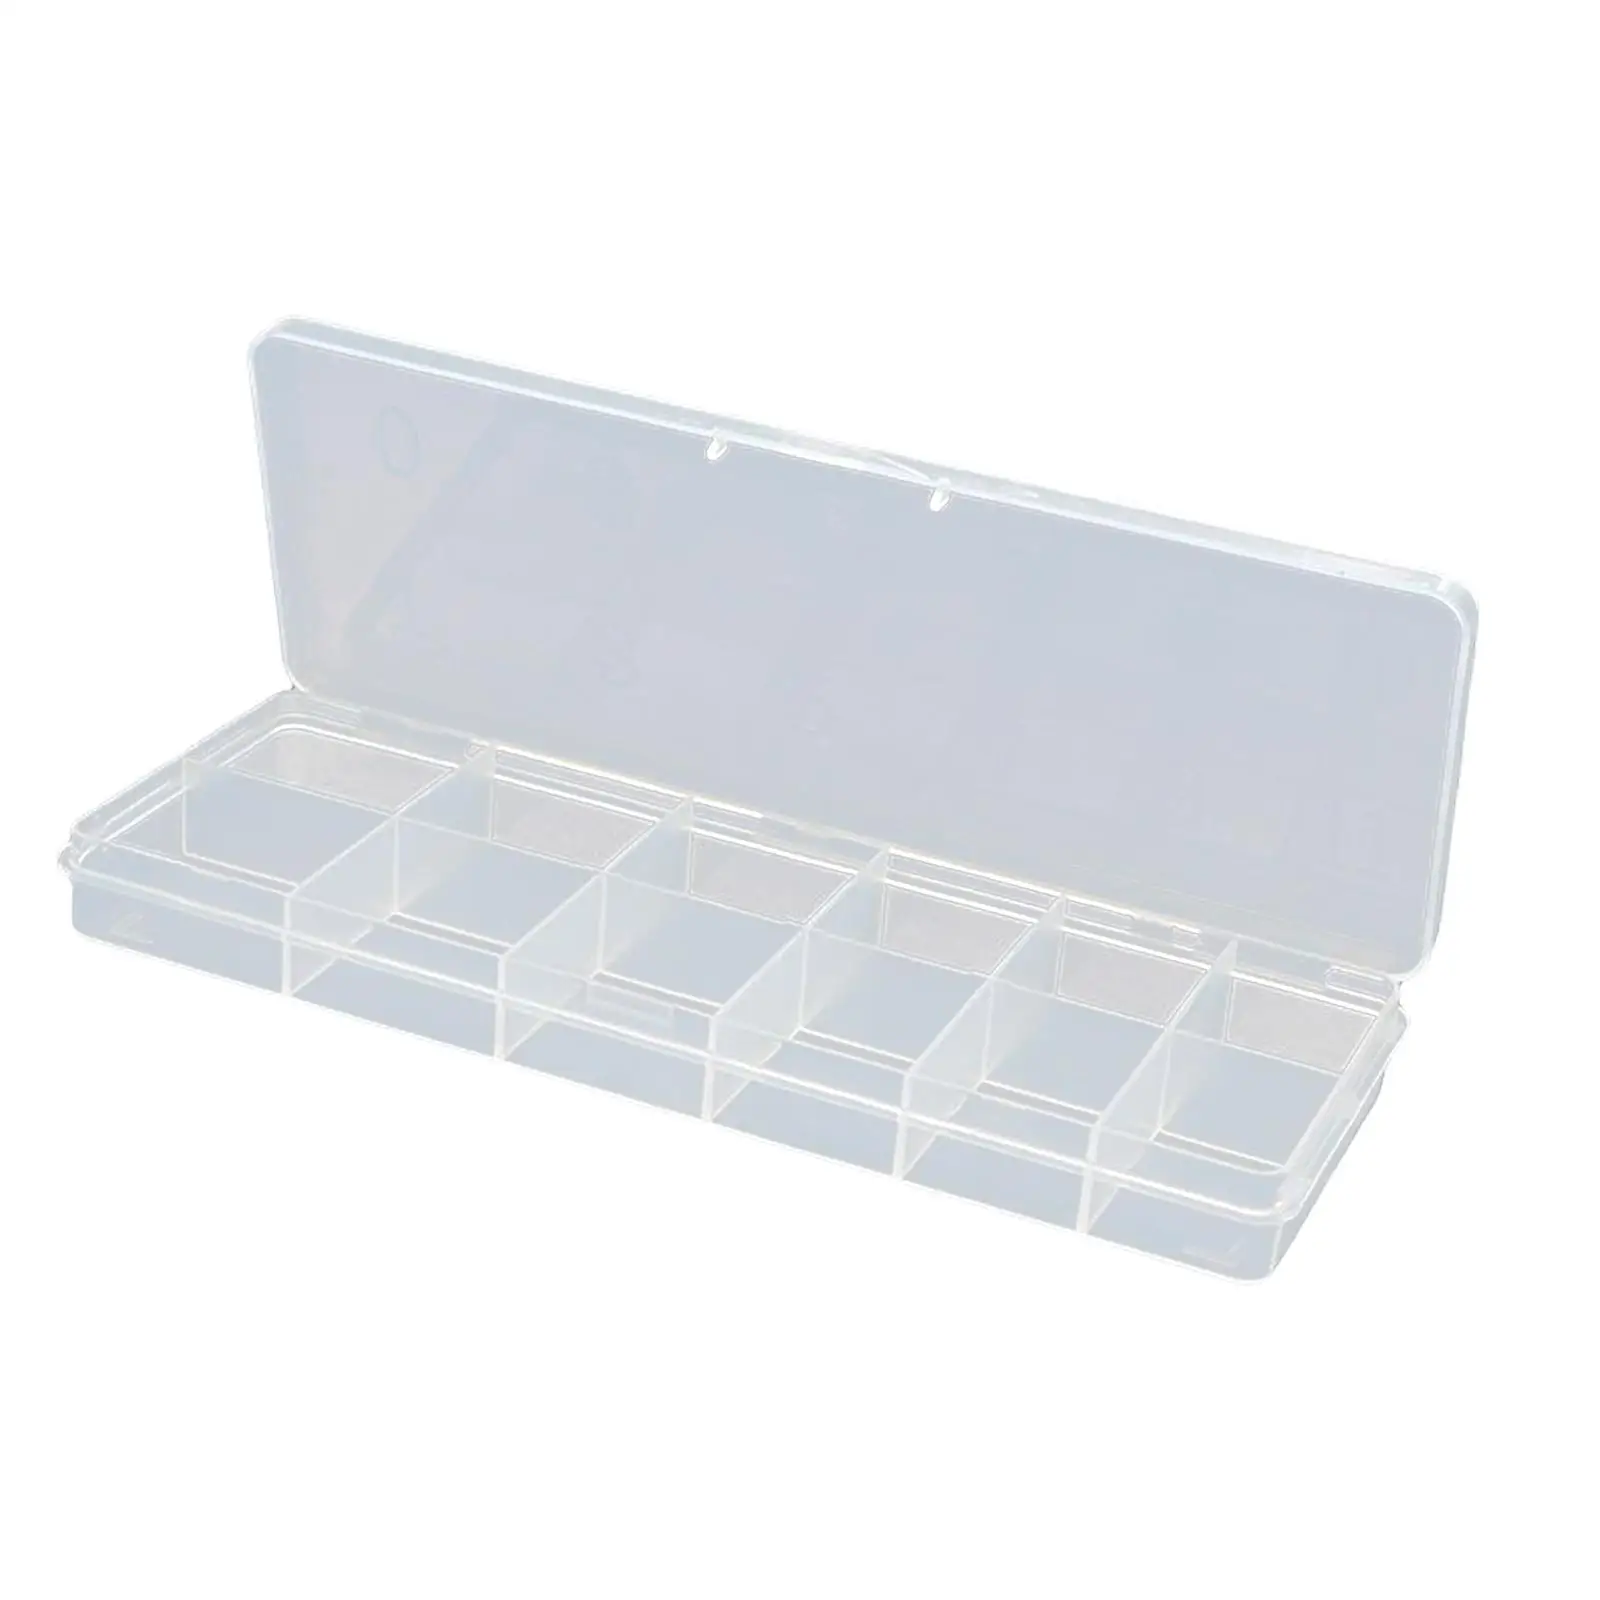 Plastic Nail Tips Organizer Storage Box with 0-11 Number Spaces 12 Compartments Nail Art Tools Container for Nail Accessories